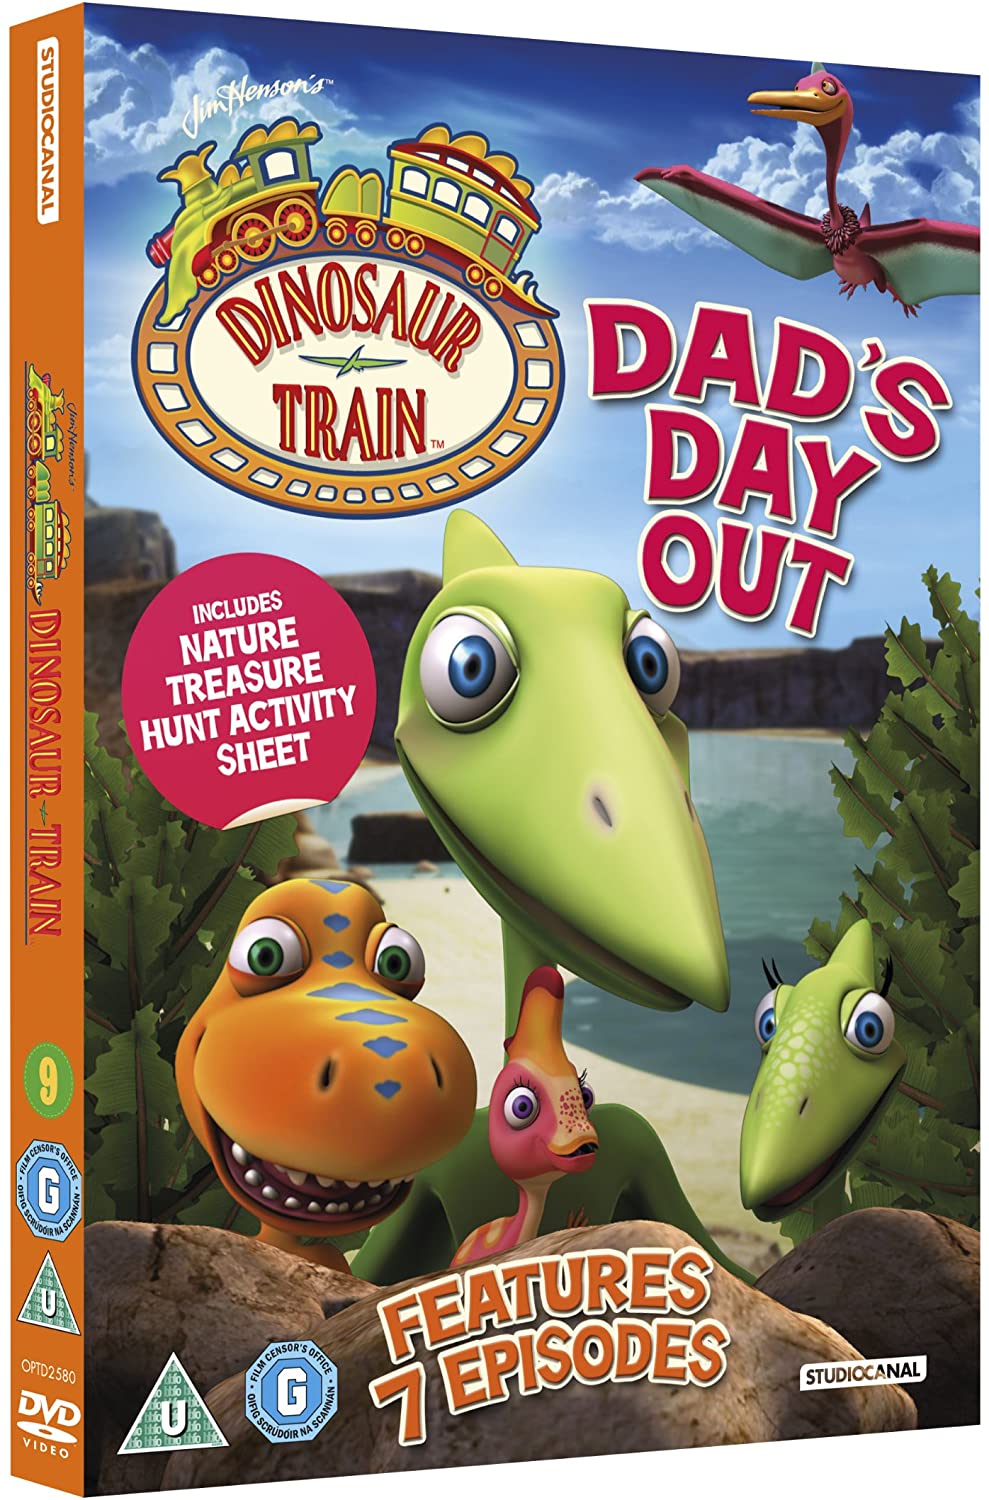 Dinosaur Train: Dad's Day Out